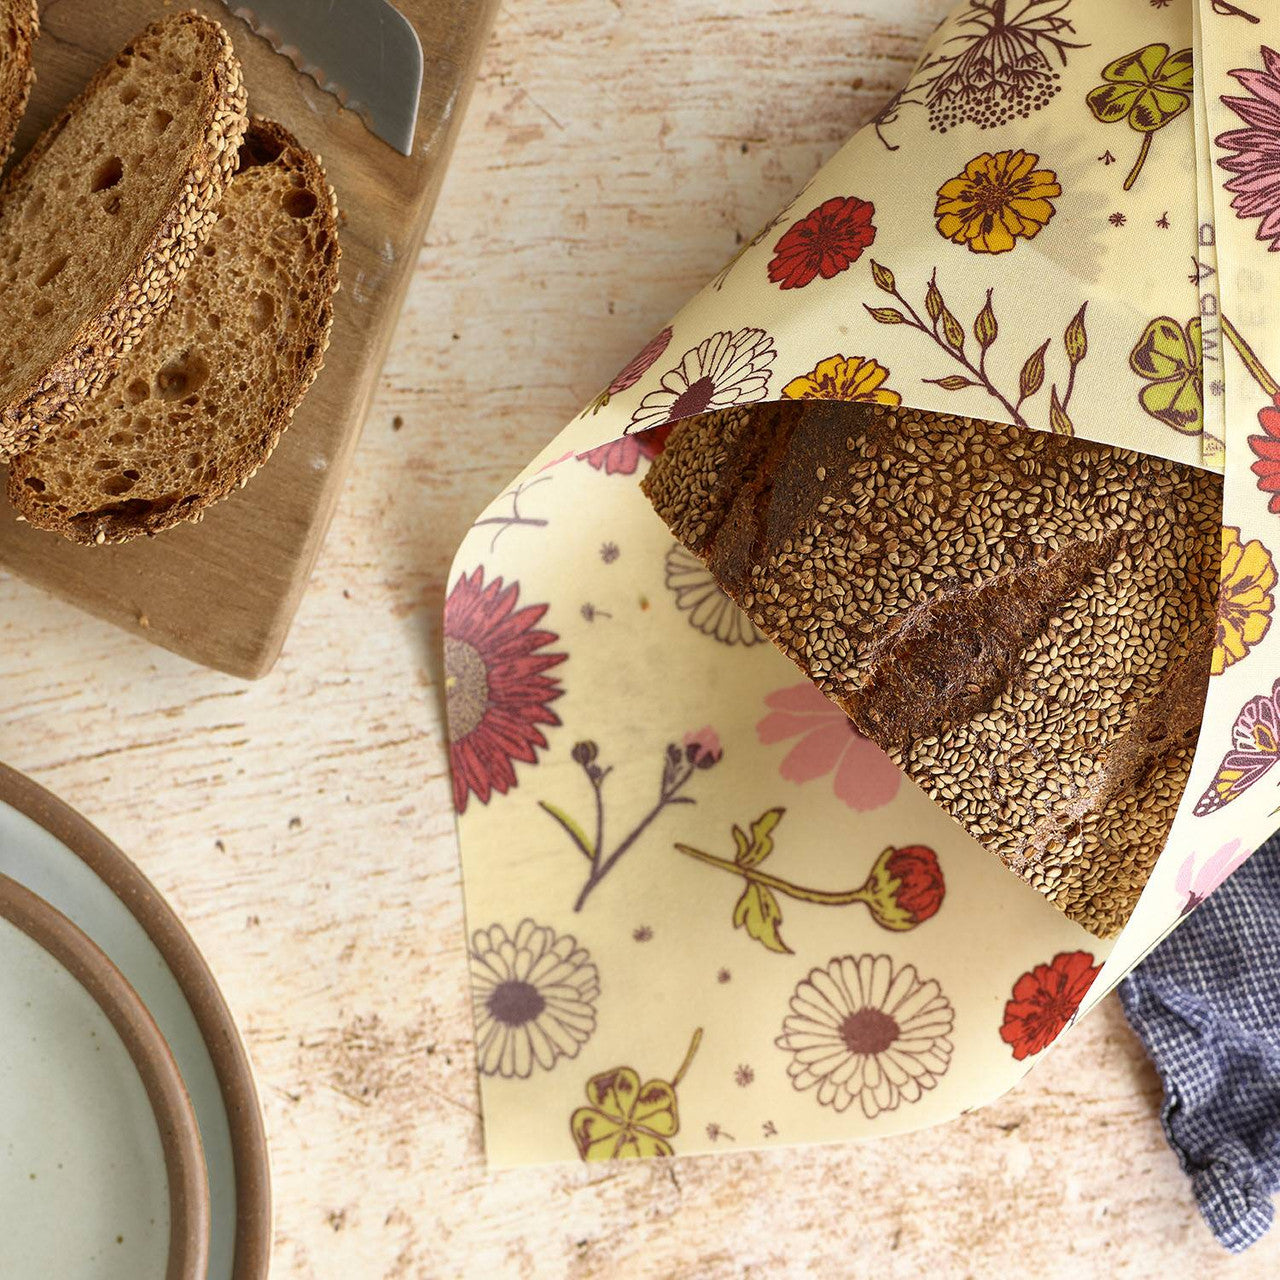 Bee's Wrap Snack and Sandwich Bags - Meadow Magic